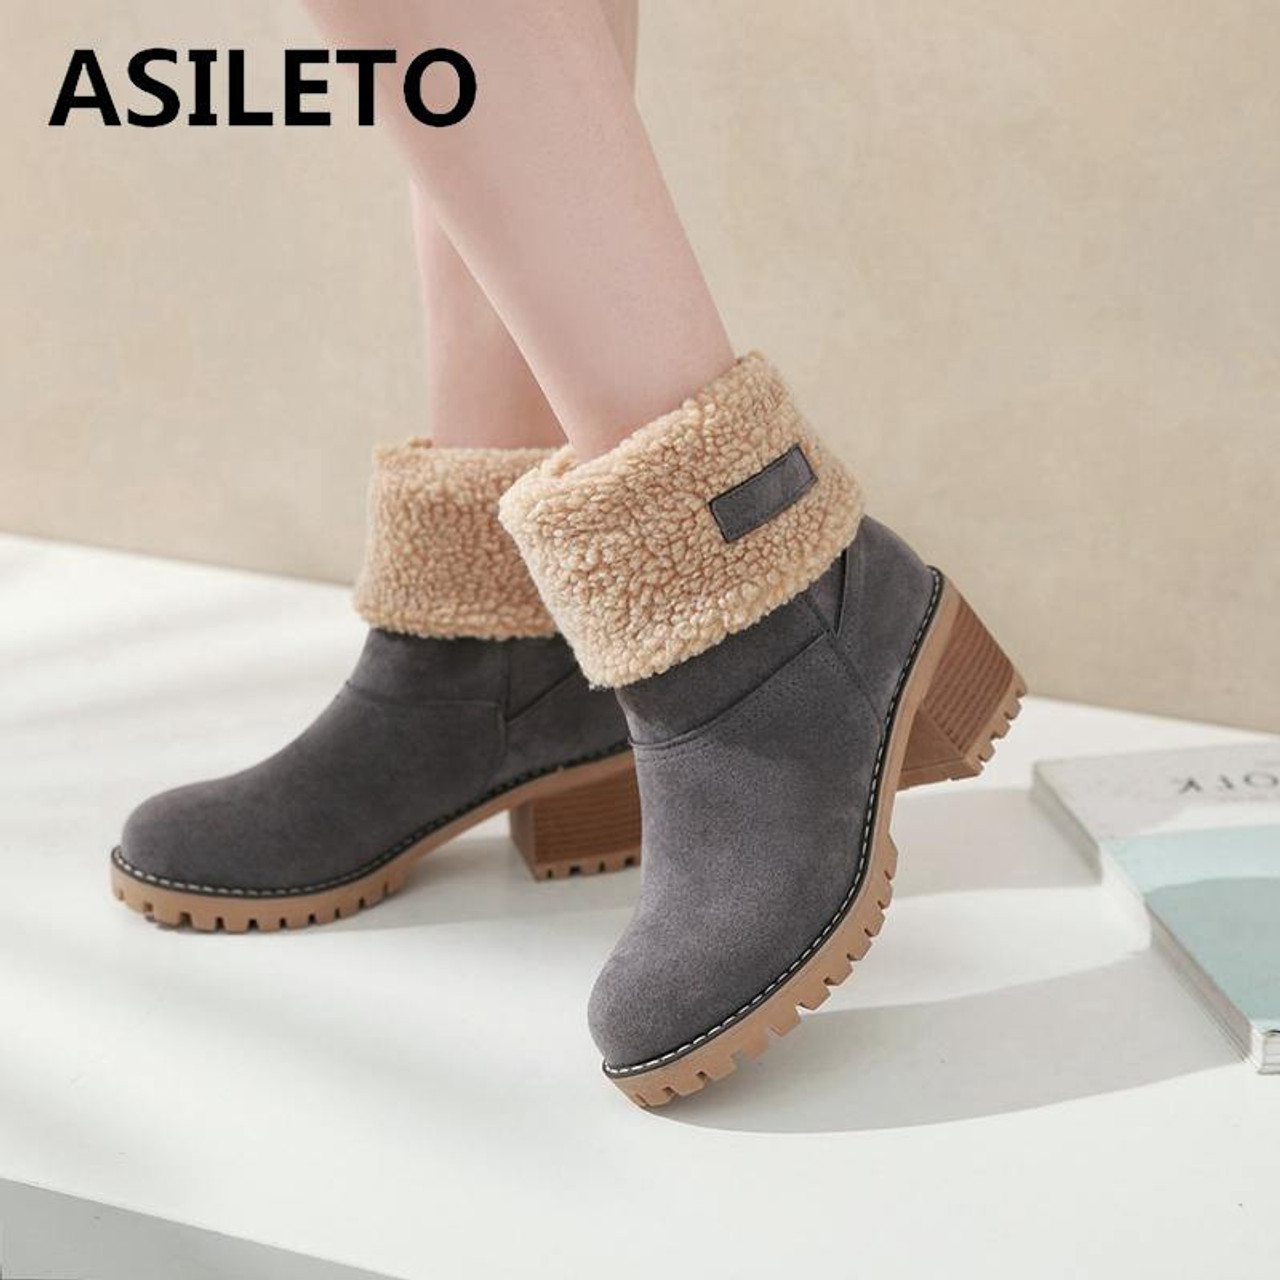 female winter shoes